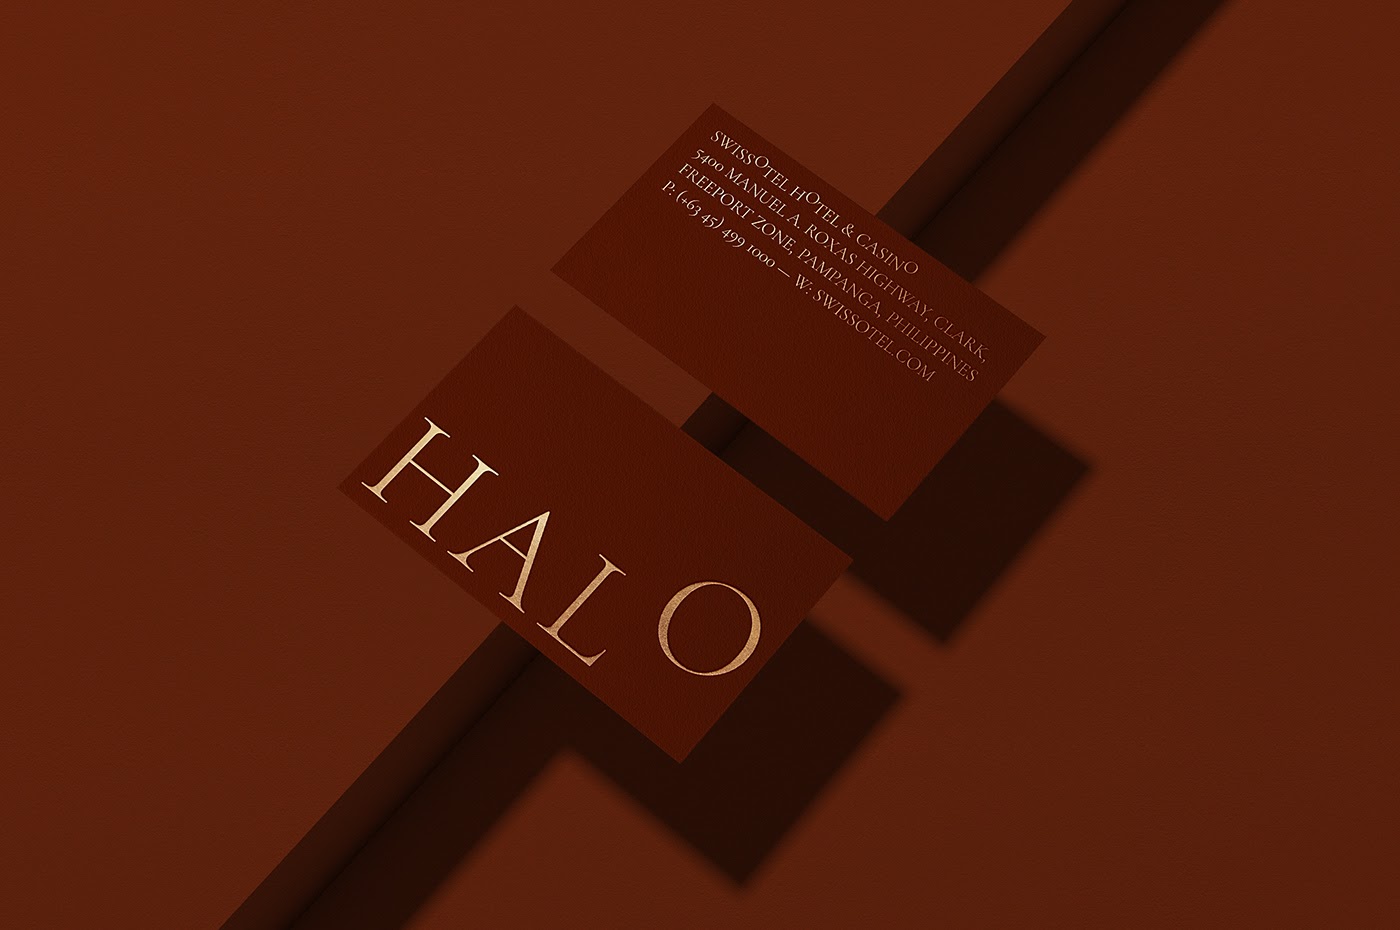 HALO by Swissotel Branding and Visual Identity